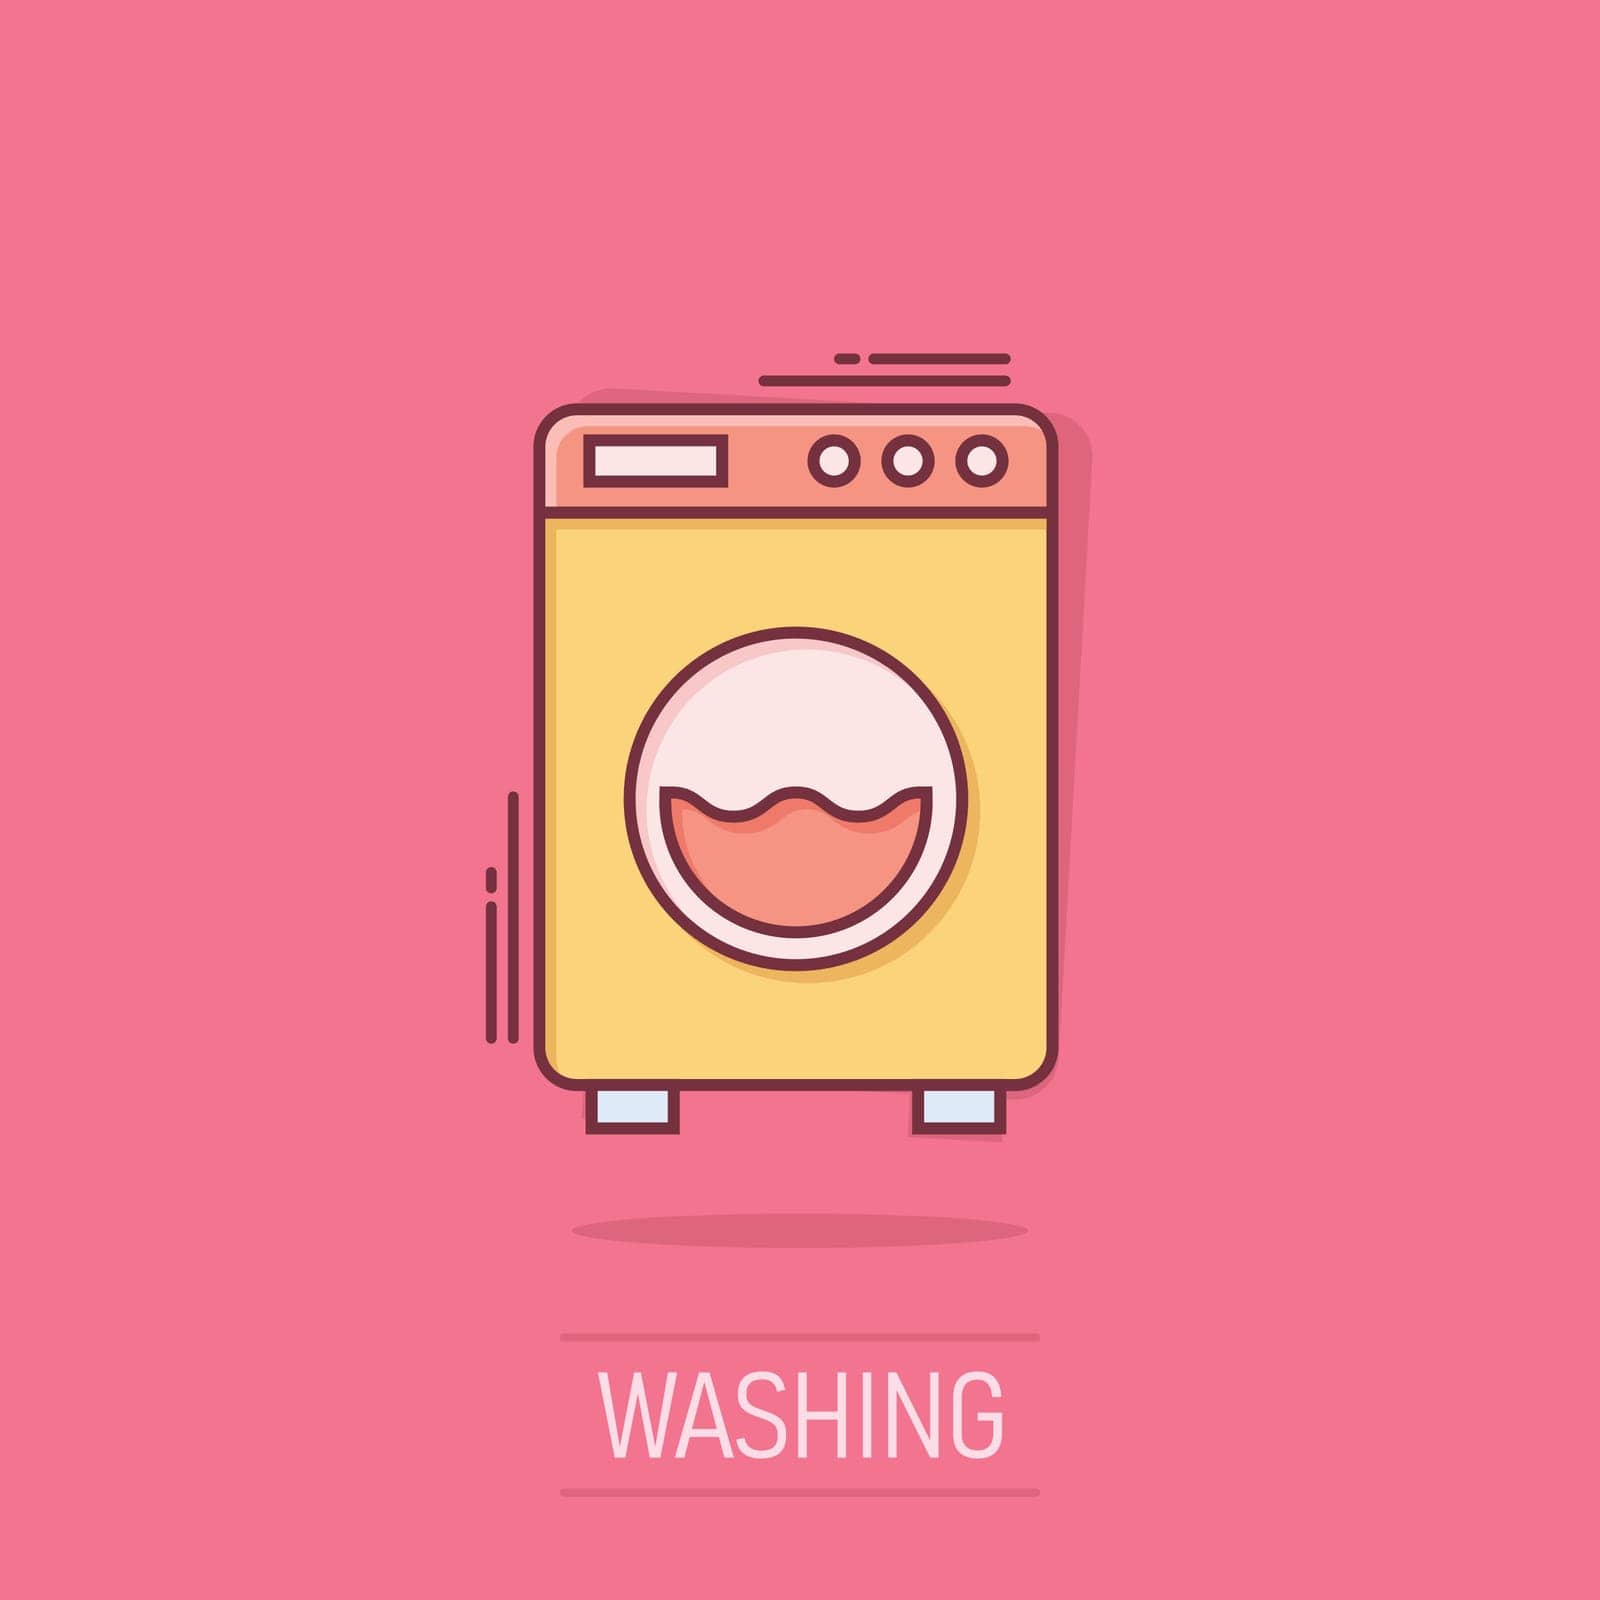 Washing machine icon in comic style. Washer cartoon vector illustration on isolated background. Laundry splash effect business concept. by LysenkoA